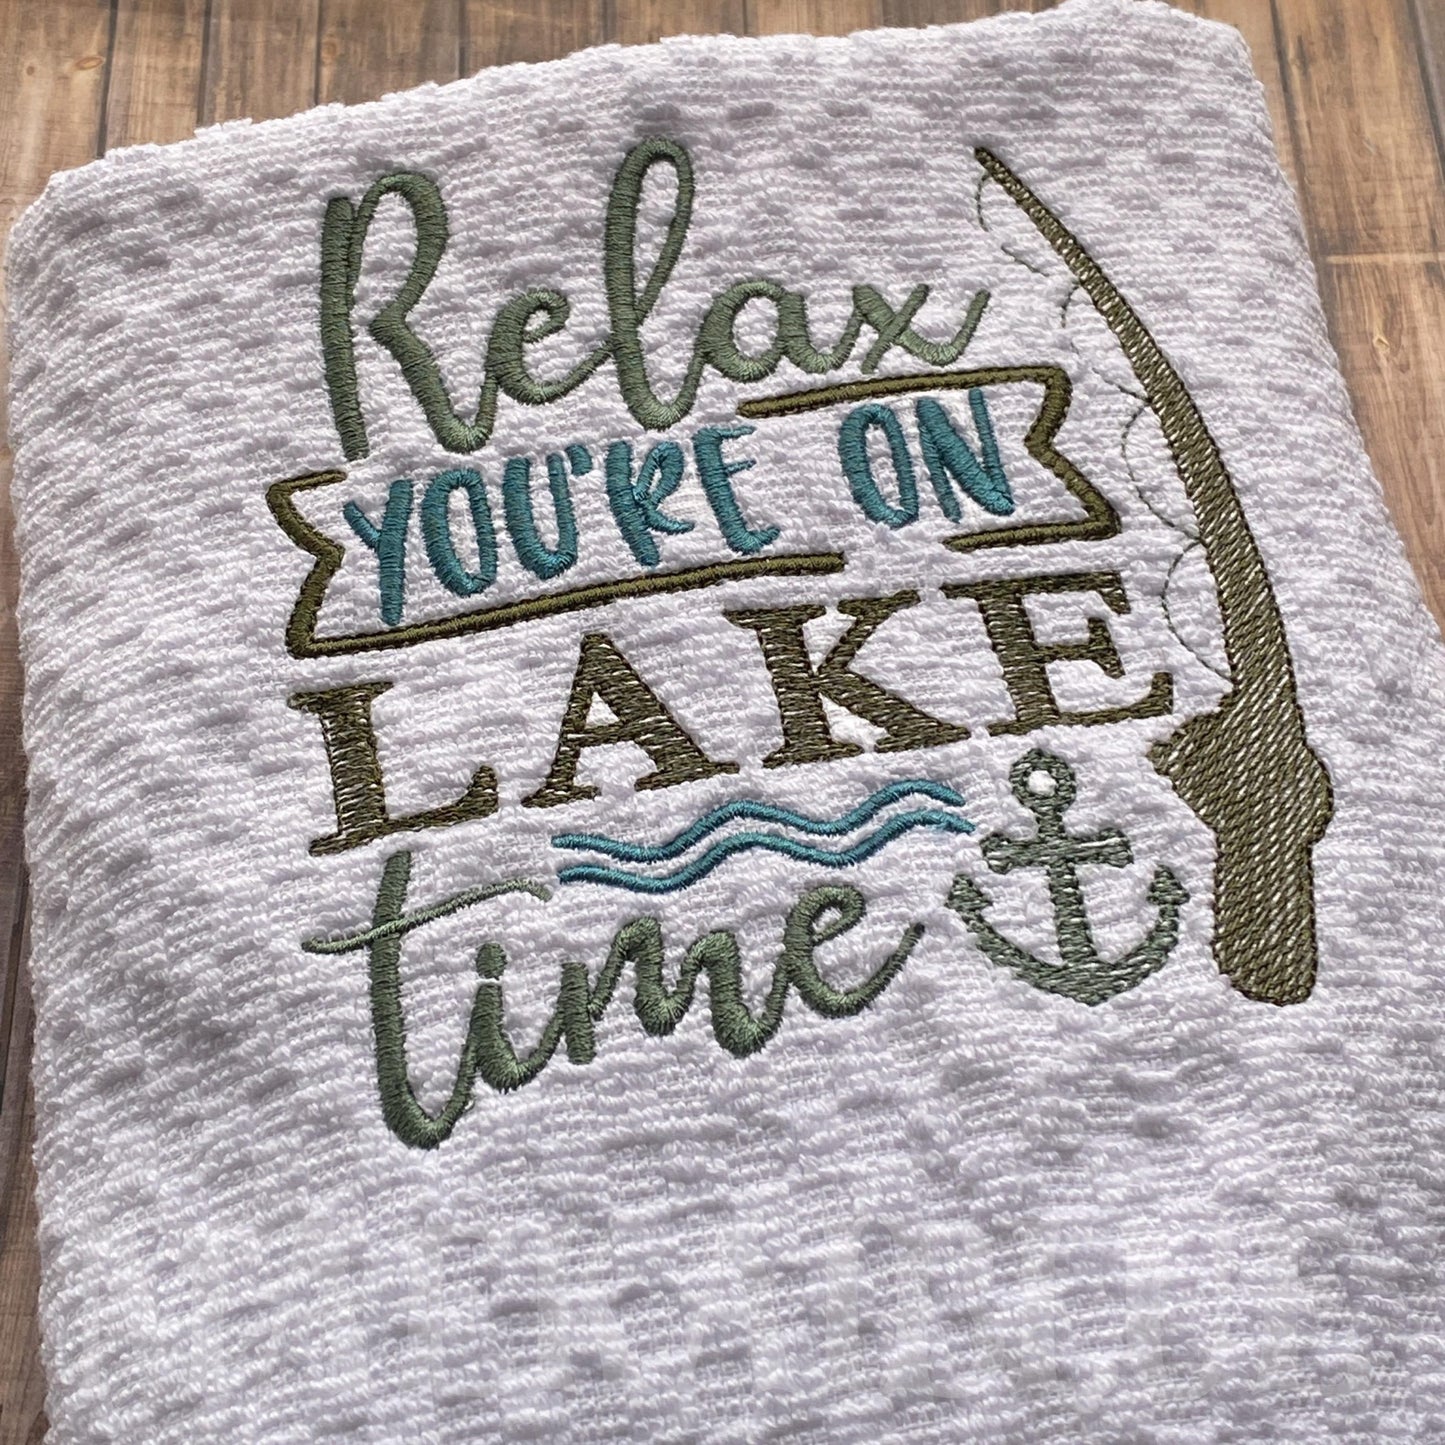 Lake Time - 3 sizes- Digital Embroidery Design